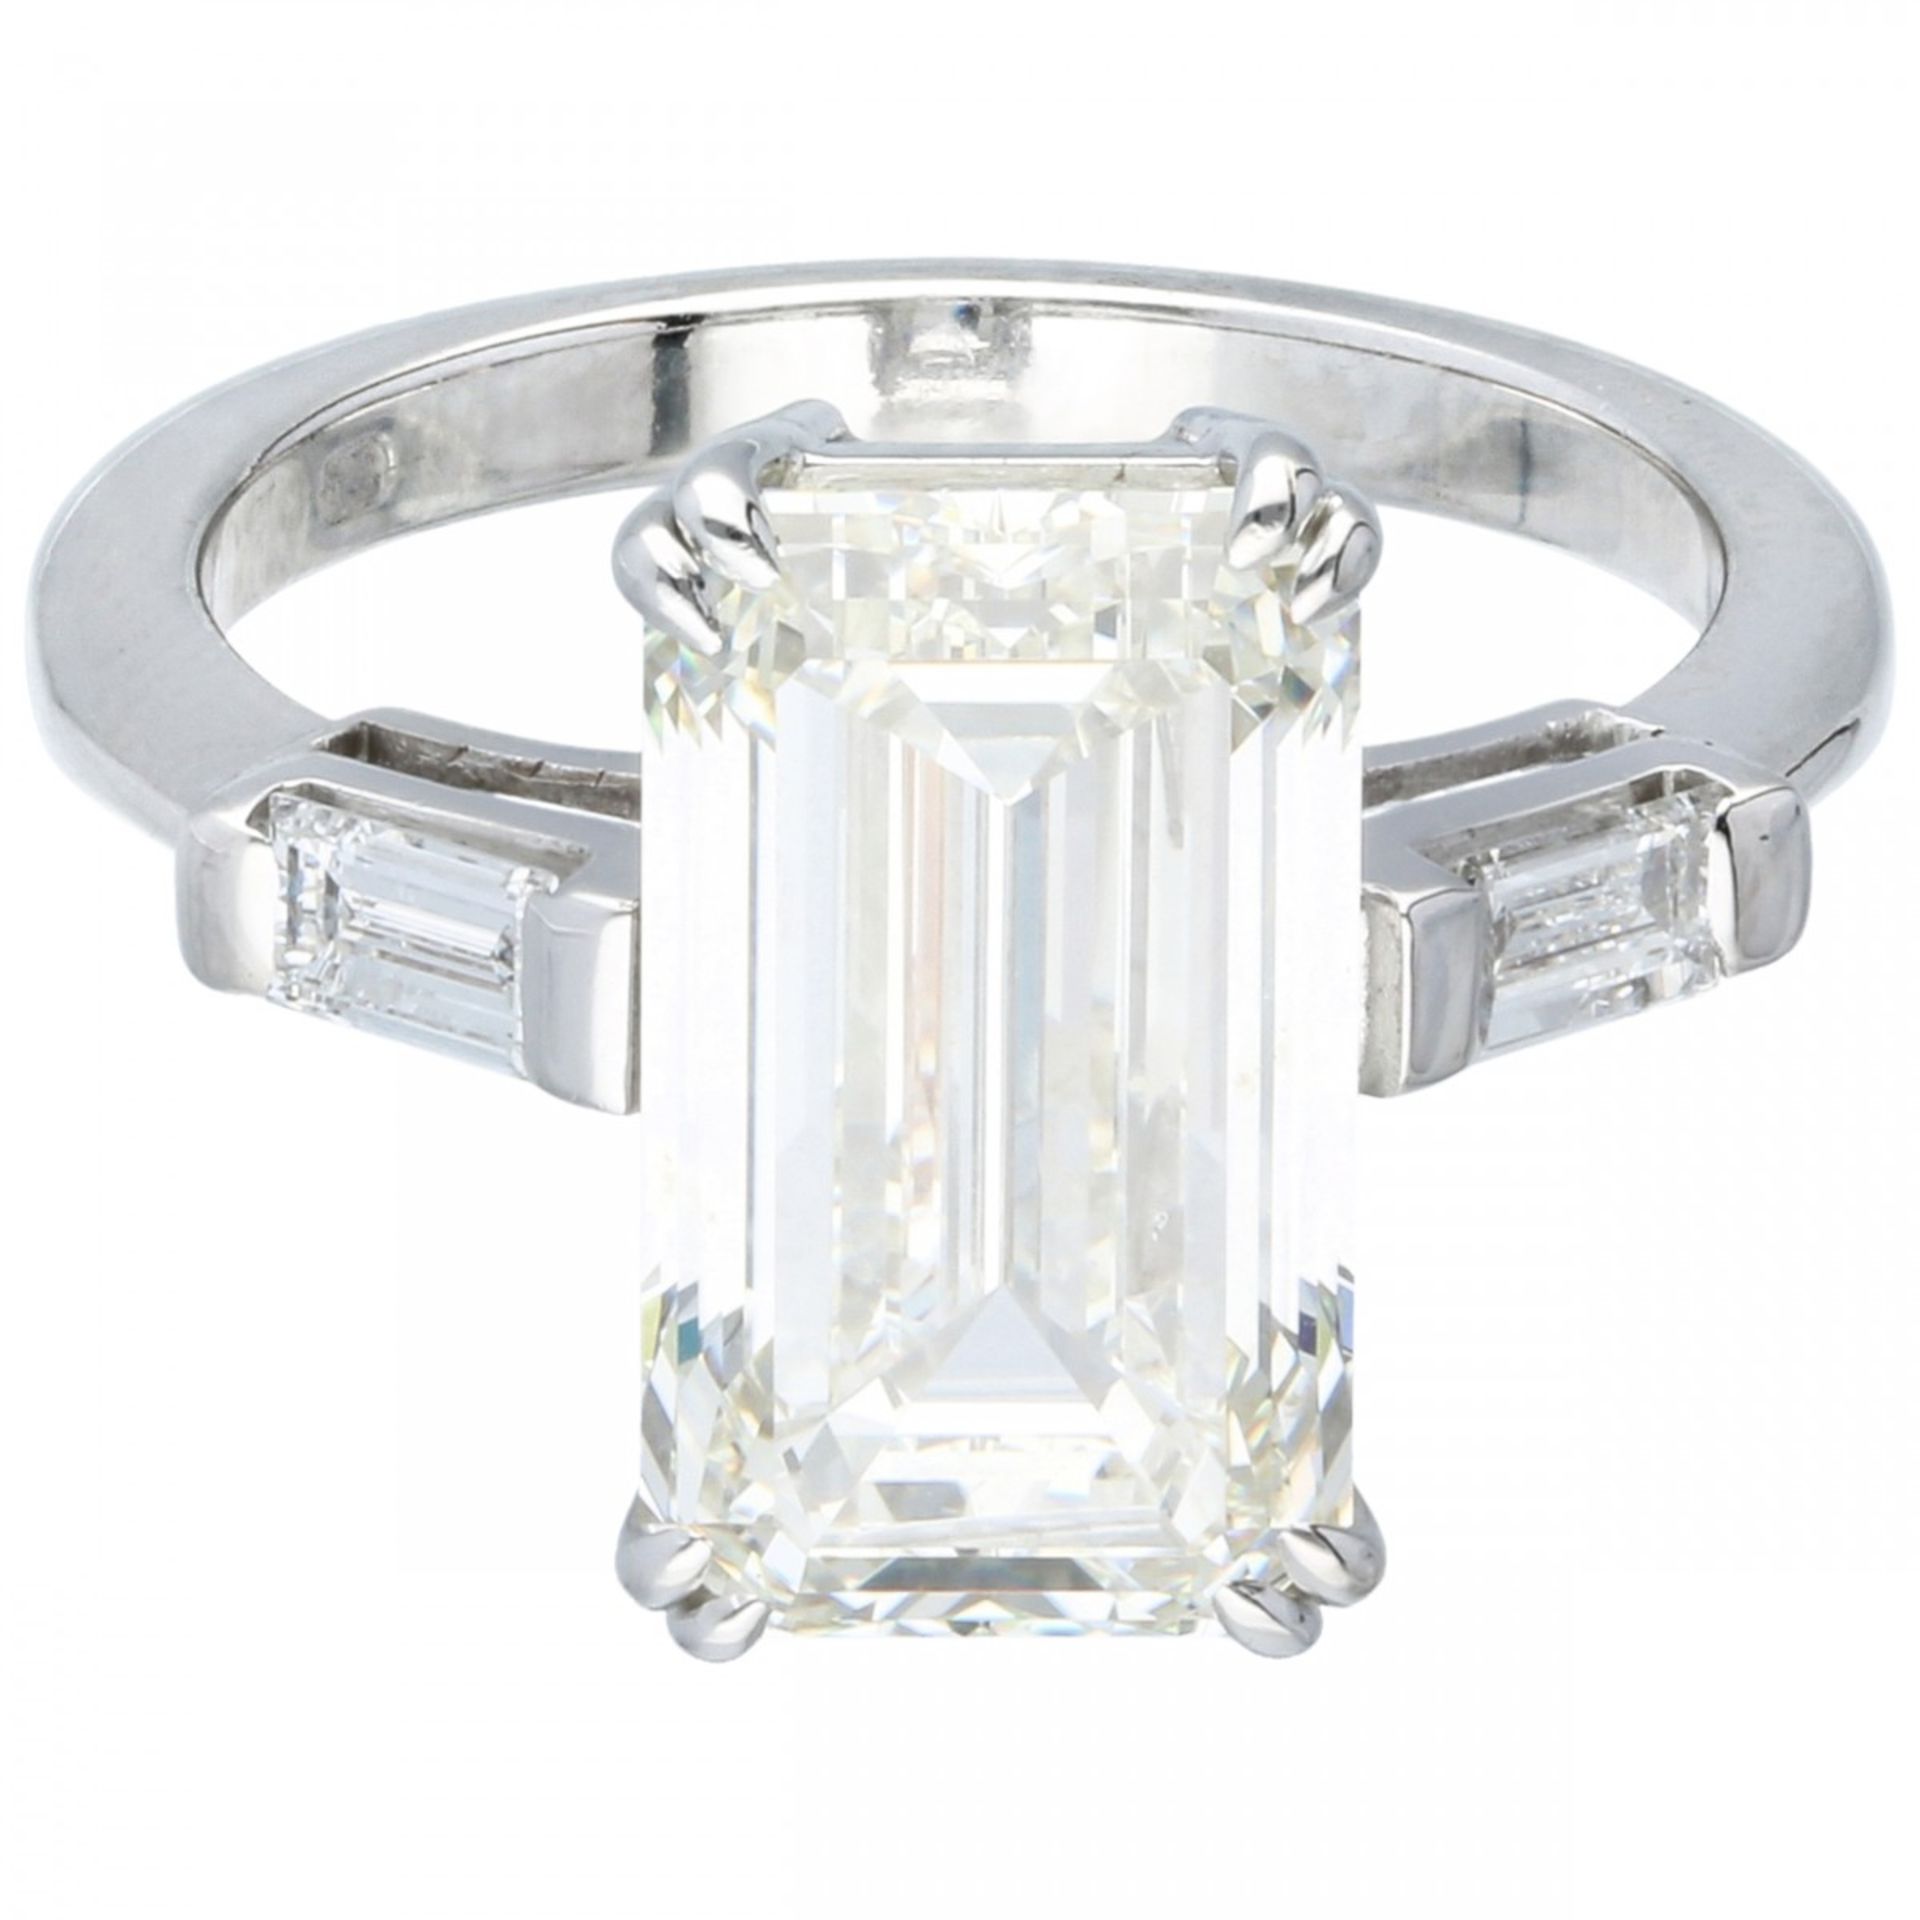 White gold Louis Reichman shoulder ring set with approx. 4.56 ct. diamond - 18 ct. - Image 3 of 9